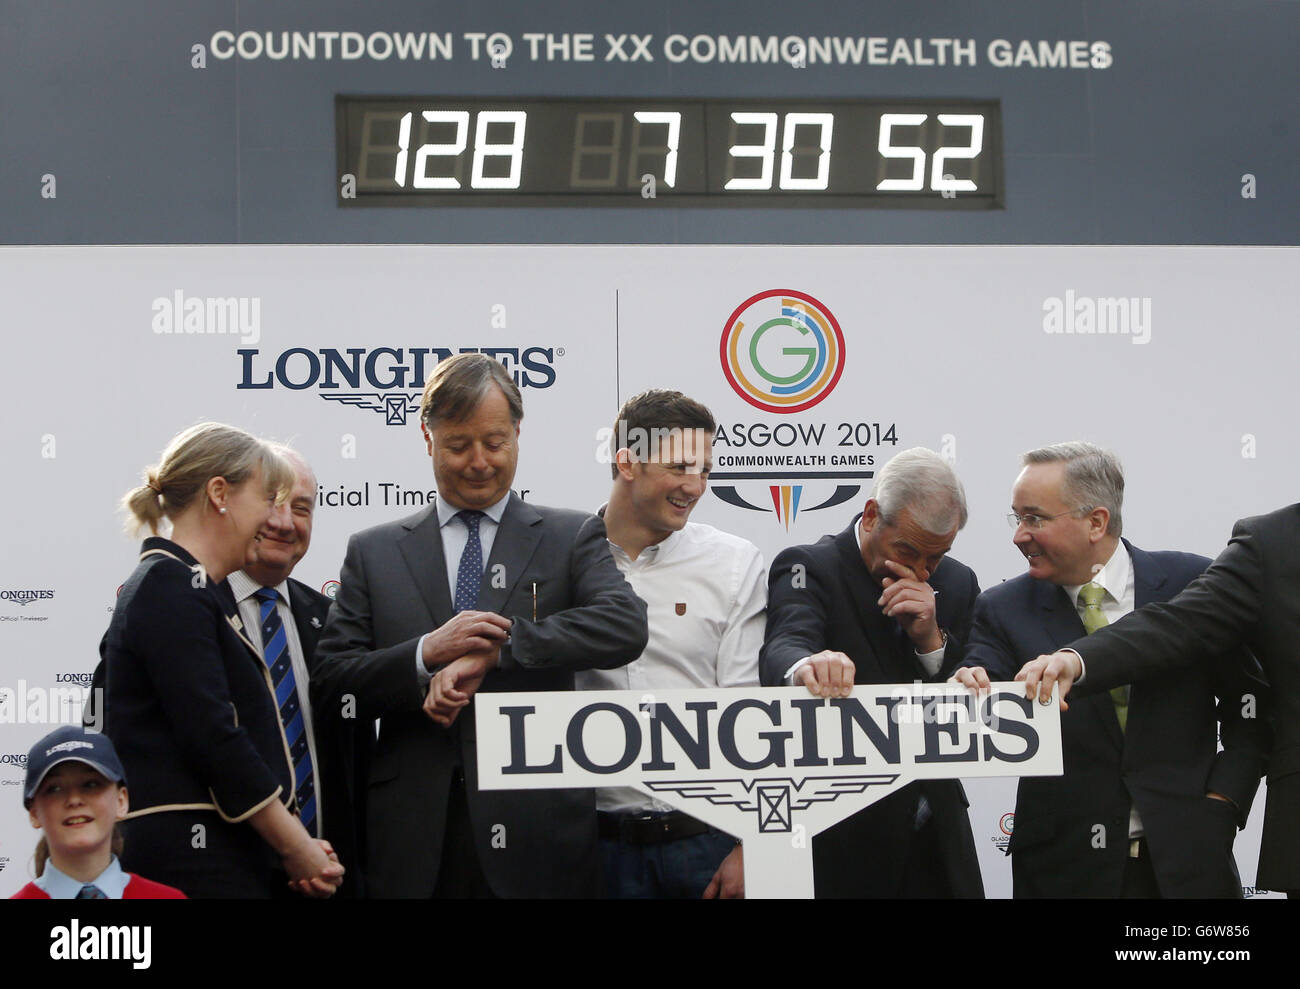 The wrong time is shown on the Official Glasgow 2014 Countdown Clock in Glasgow Central Station, Scotland, as it is switched on by (left to right) Minister for Sport Shona Robison, Chair of Commonwealth Games Scotland Michael Cavanagh, Longines Vice President Charles Villoz, Glasgow 2014 Ambassador Michael Jamieson, Glasgow 2014 Chairman Lord Smith of Kelvin and Leader of Glasgow City Council Gordon Matheson. Stock Photo